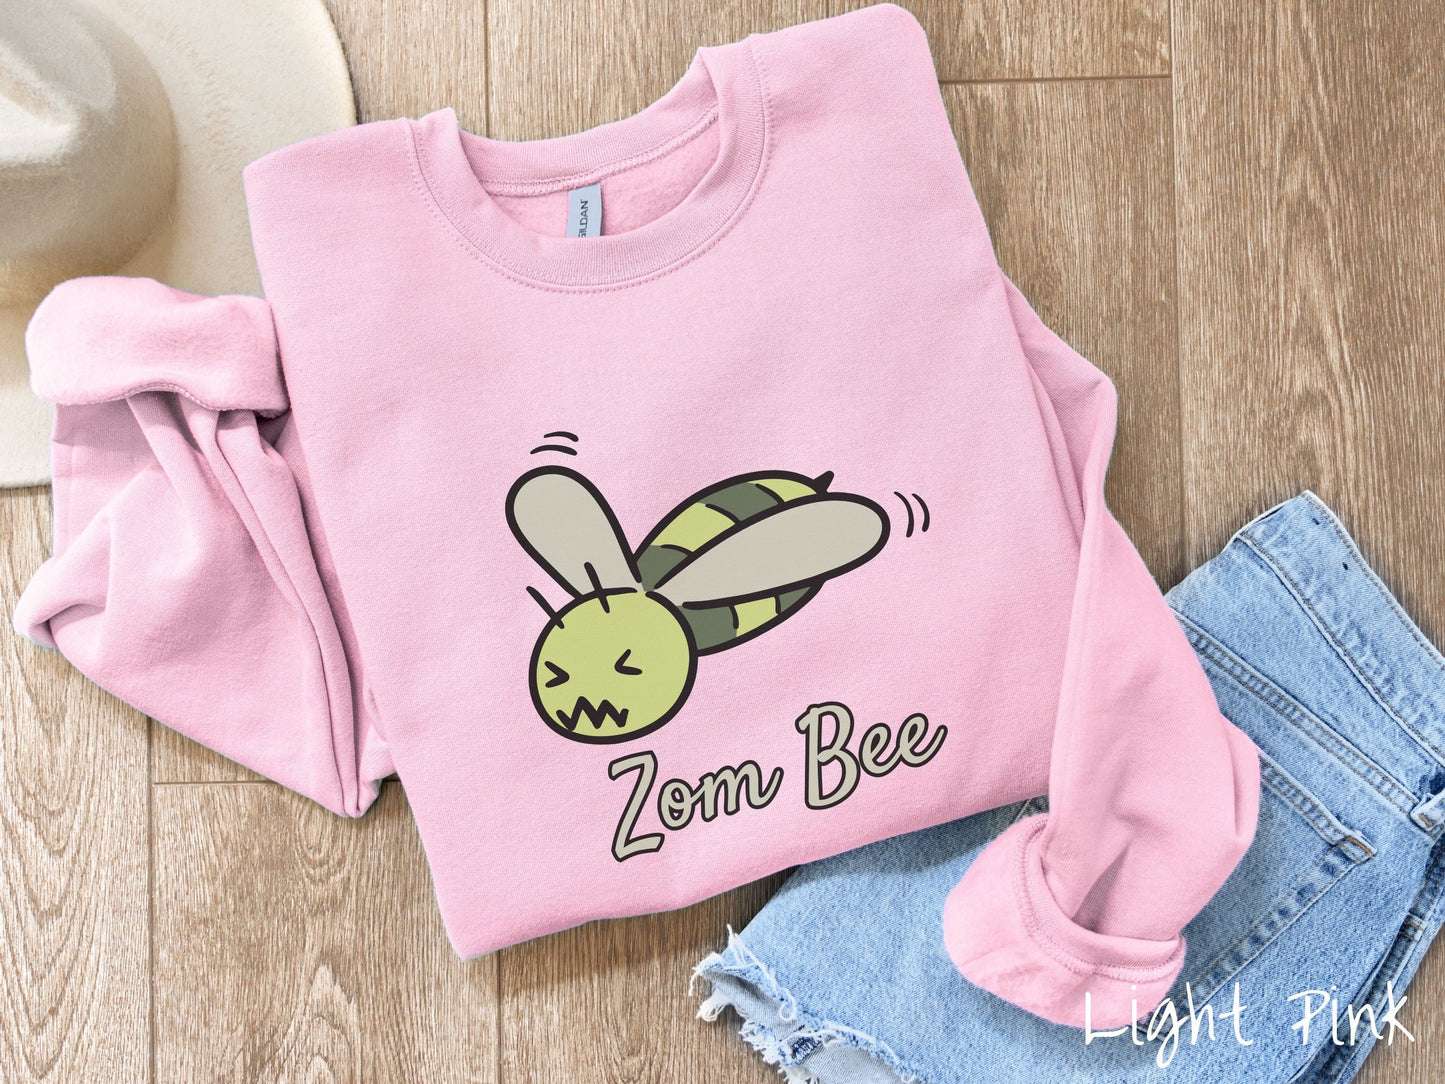 A cute, vintage light pink colored comfy sweatshirt with the text Zom Bee in light green, cursive font. Above that is a light and dark green honey bee with a crazy face buzzing in the air.